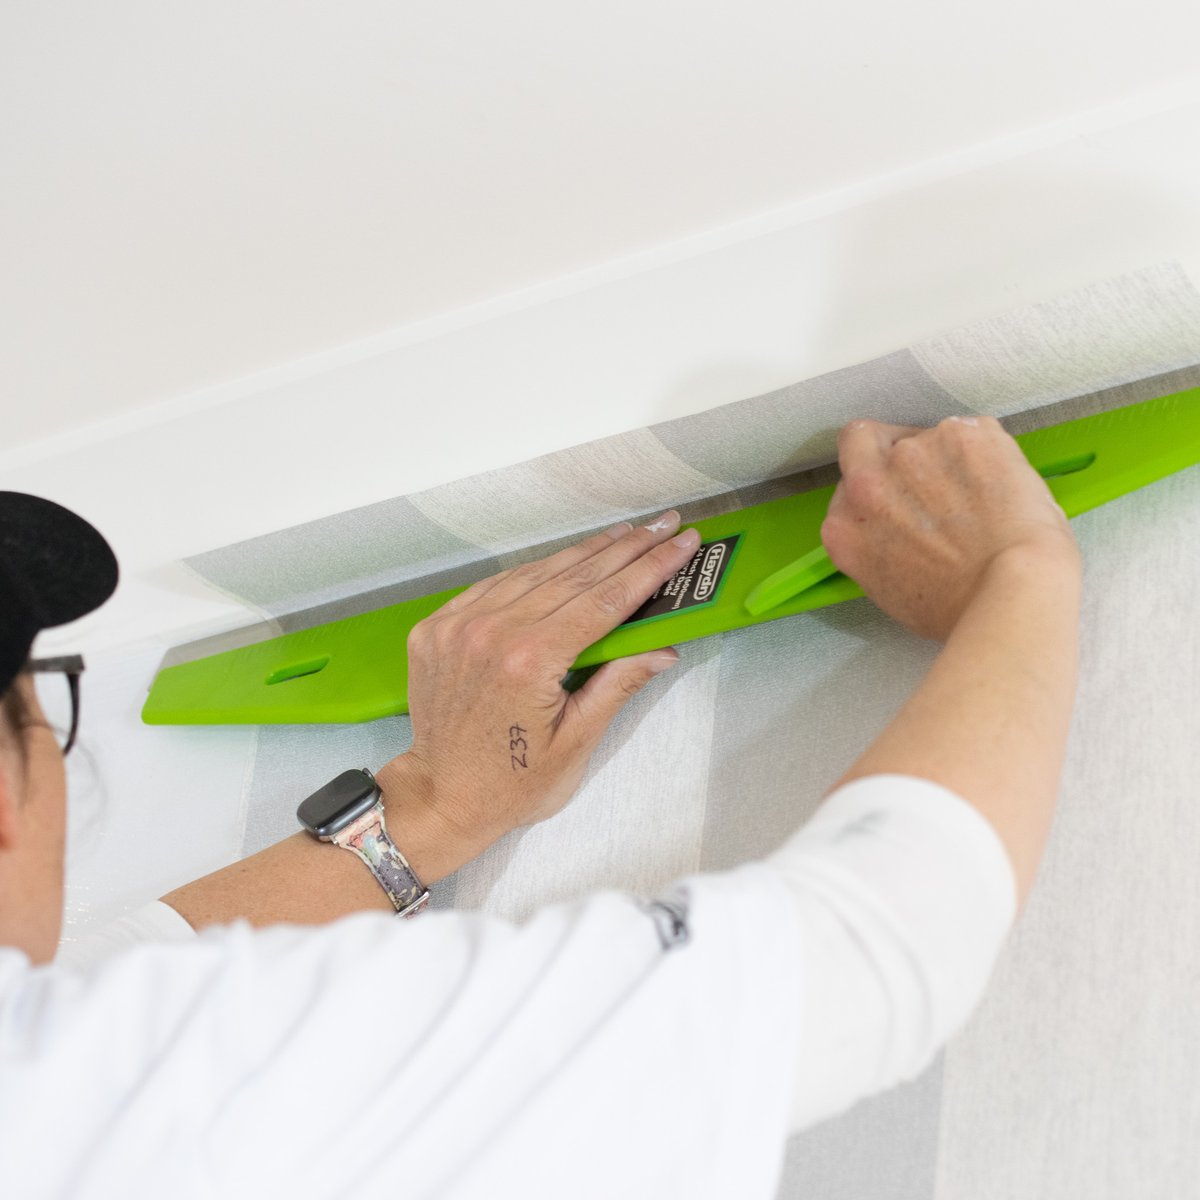 Trim wallpaper flawlessly and safeguard against splatter and over-painting with the Haydn Heavy Duty Trim Guide! This guide is perfect for precise cuts in windows, doors, corners and ceilings, leaving no smudges behind. 

#Haydn #DIYEssentials #TrimmingPerfection #HaydnTools